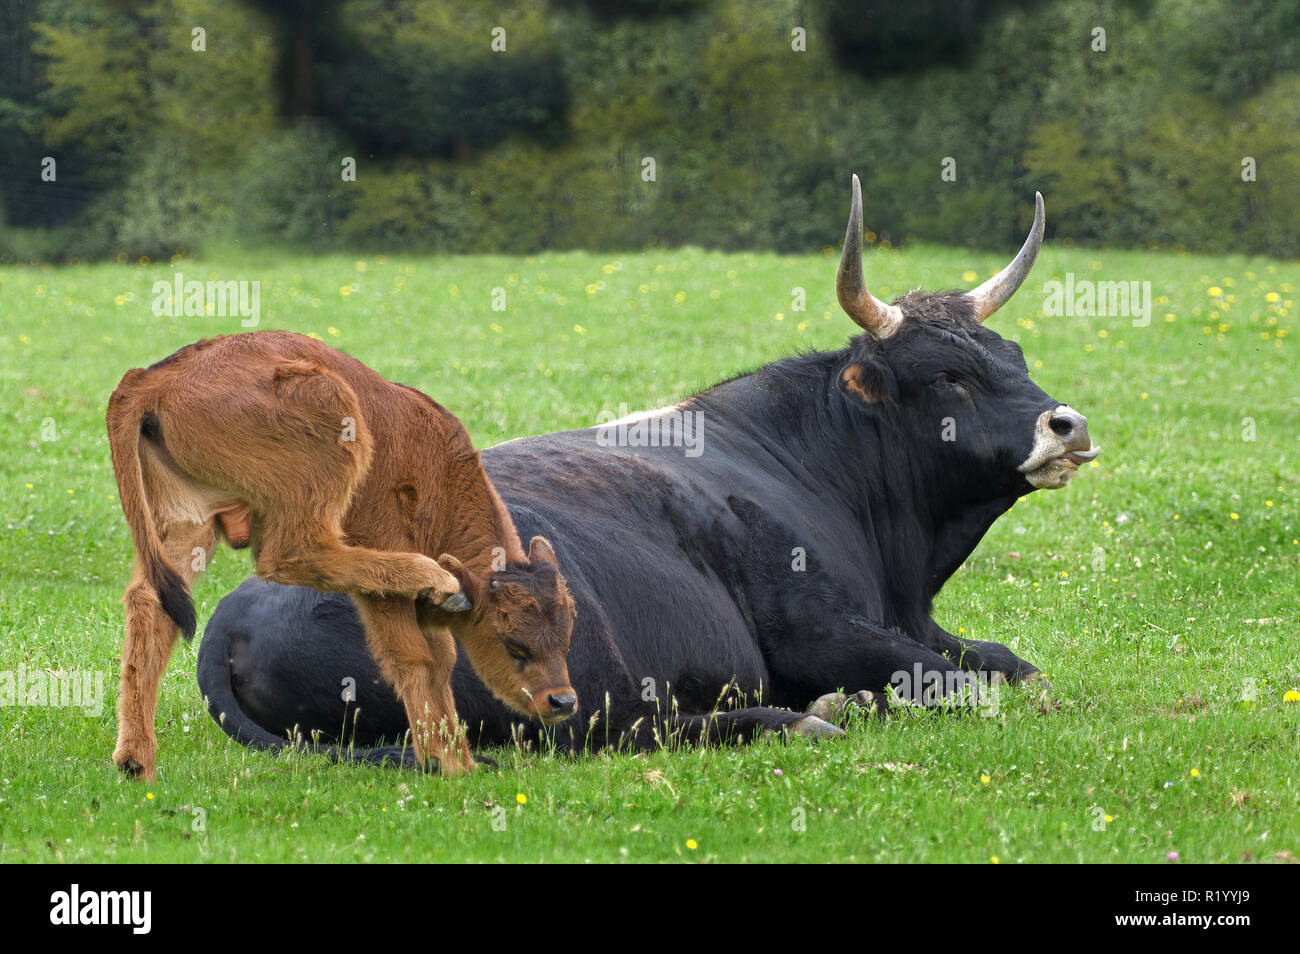 Recreated Aurochs, Heck Cattle (Bos primigenius primigenius). Calf standing next to it resting father, scratching itself. Germany Stock Photo